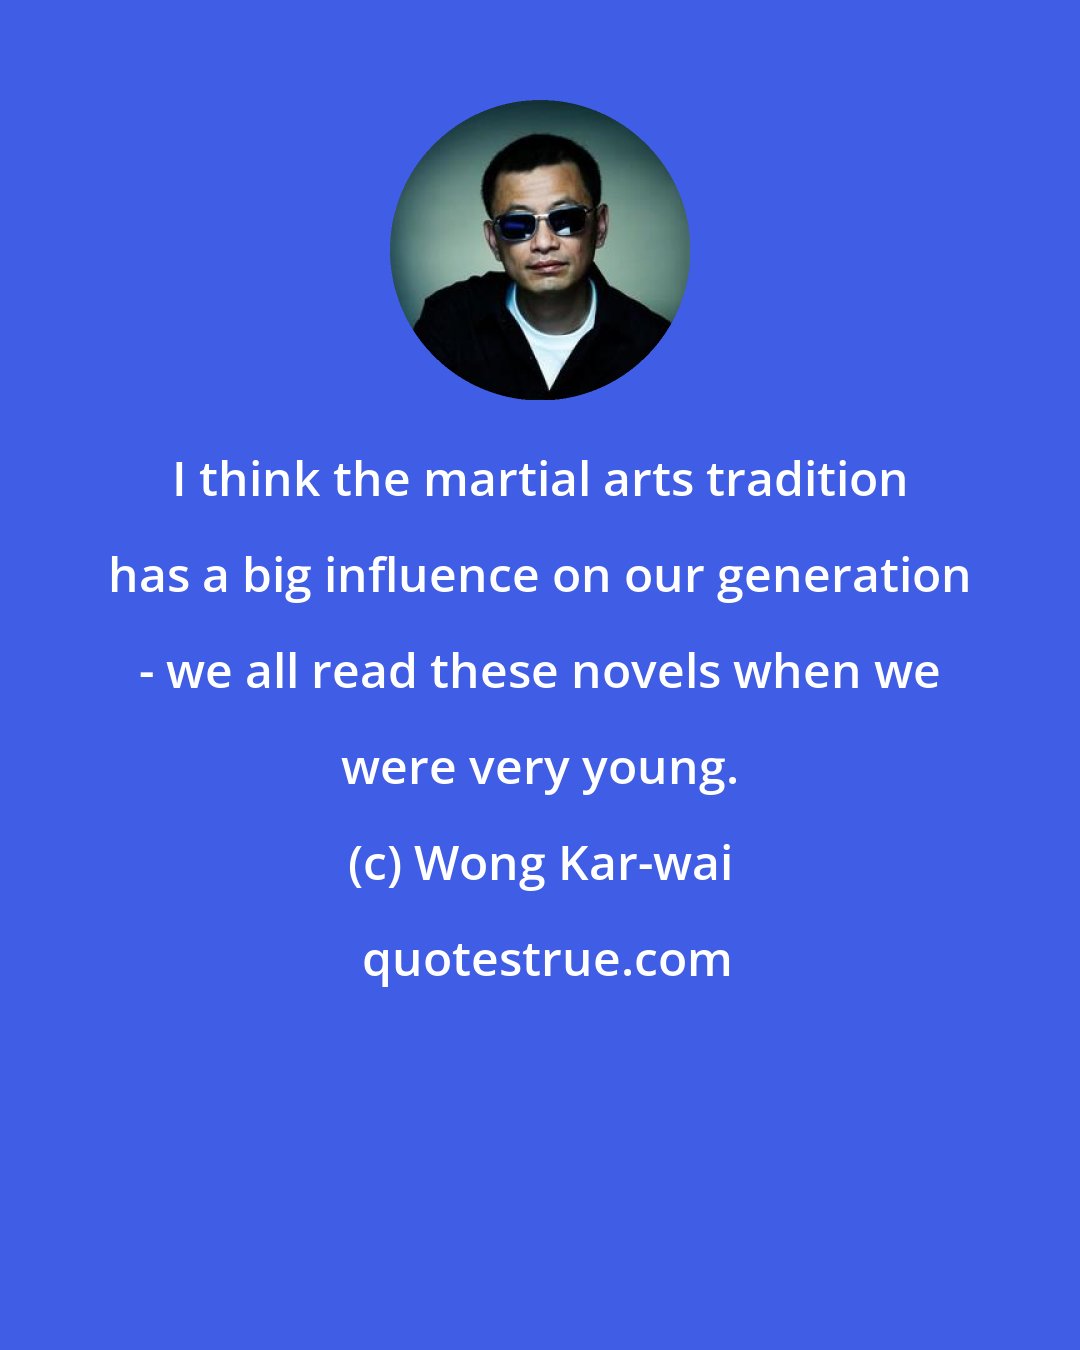 Wong Kar-wai: I think the martial arts tradition has a big influence on our generation - we all read these novels when we were very young.